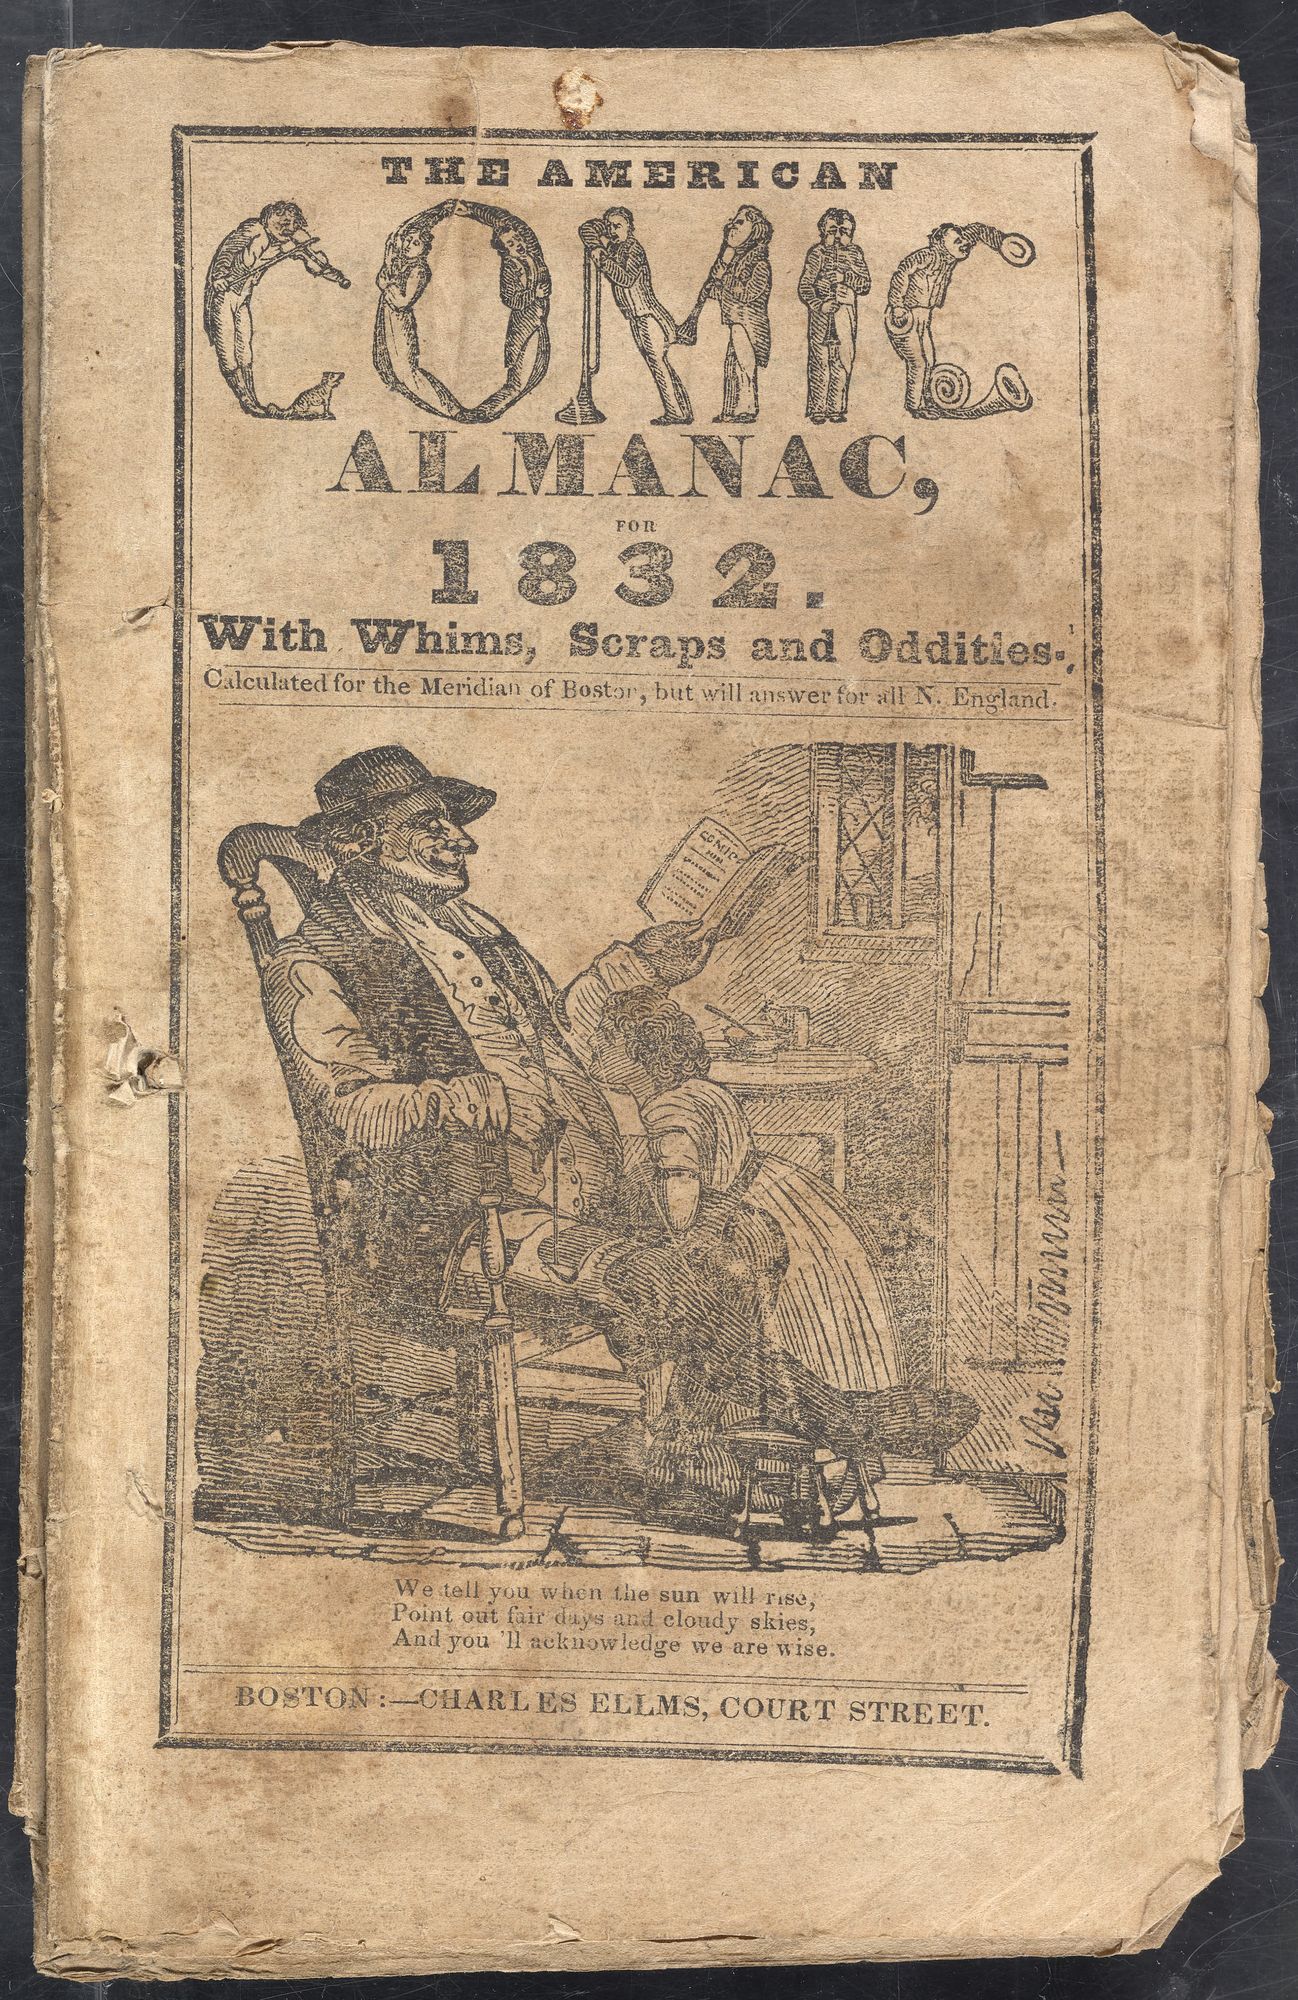 cover of The American Comic Almanac for 1832